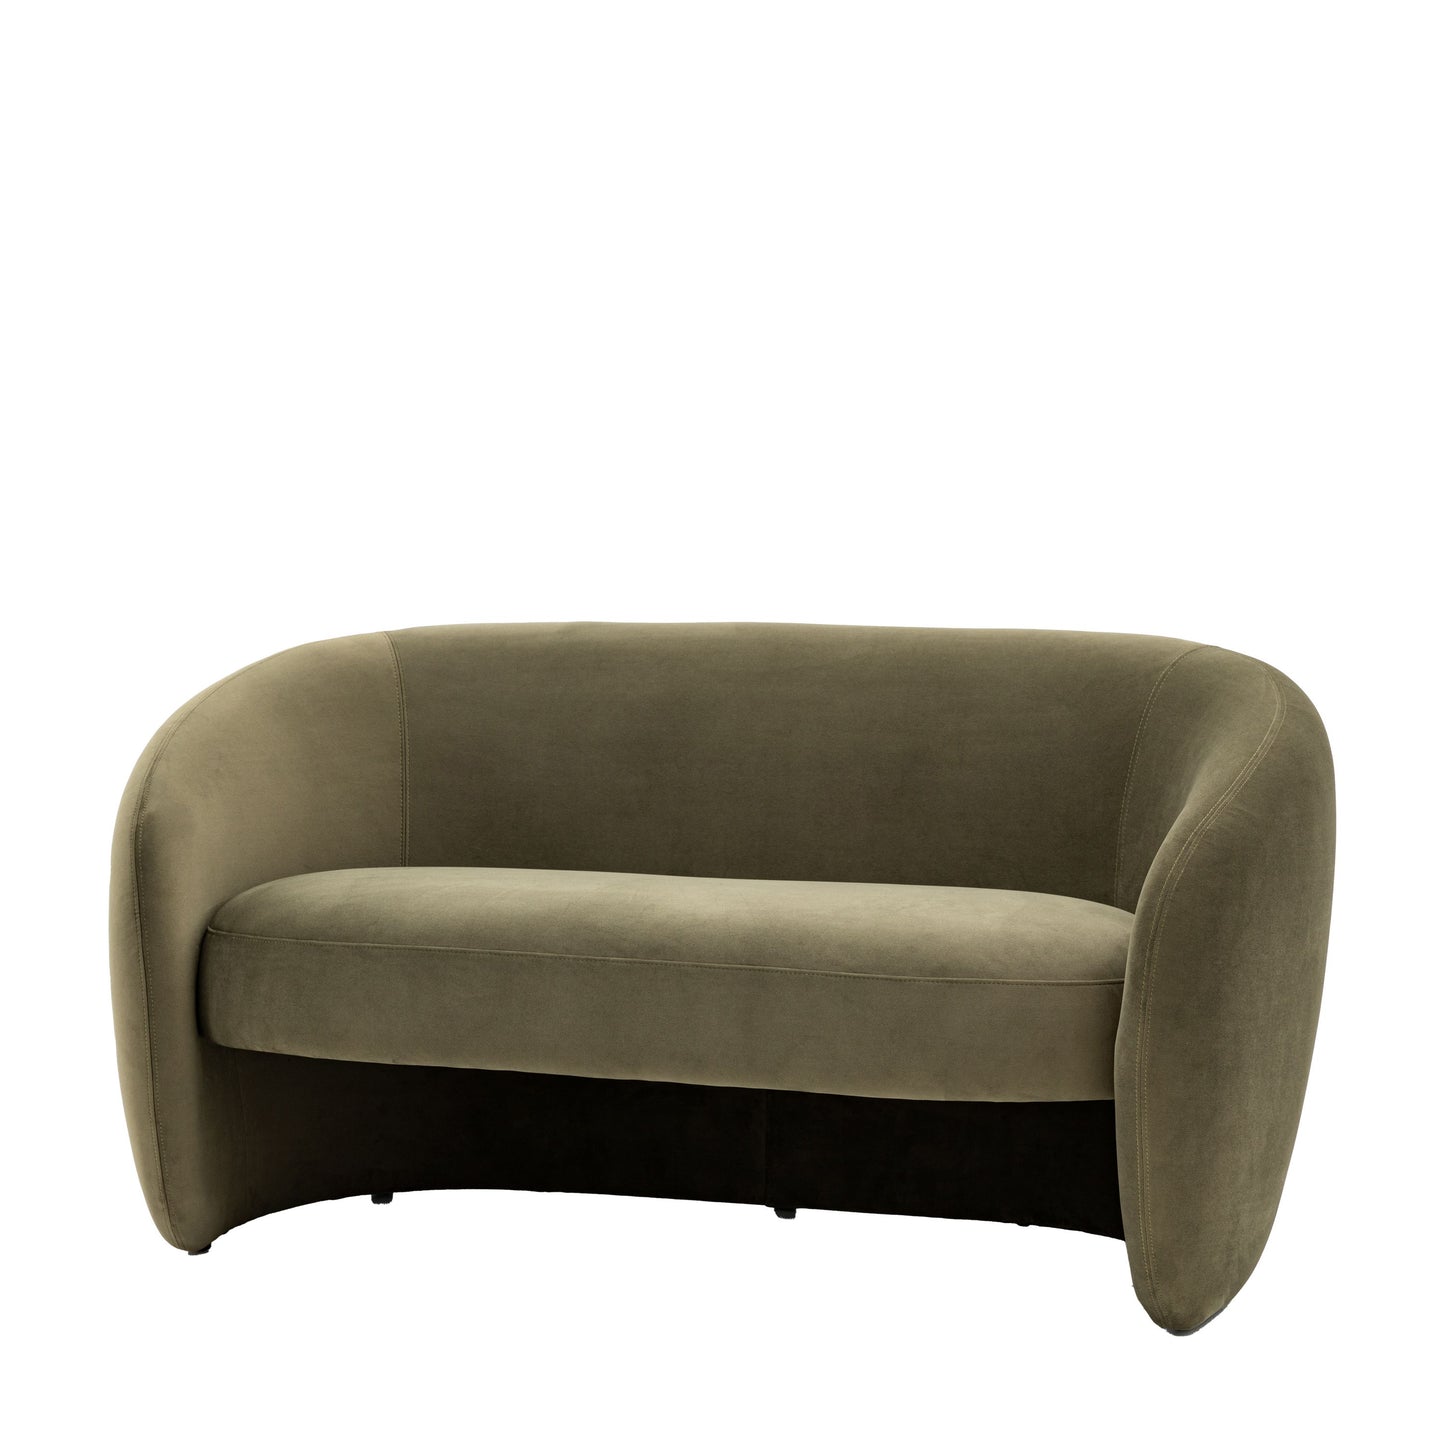 Aoife 2 Seater Sofa in Moss Green